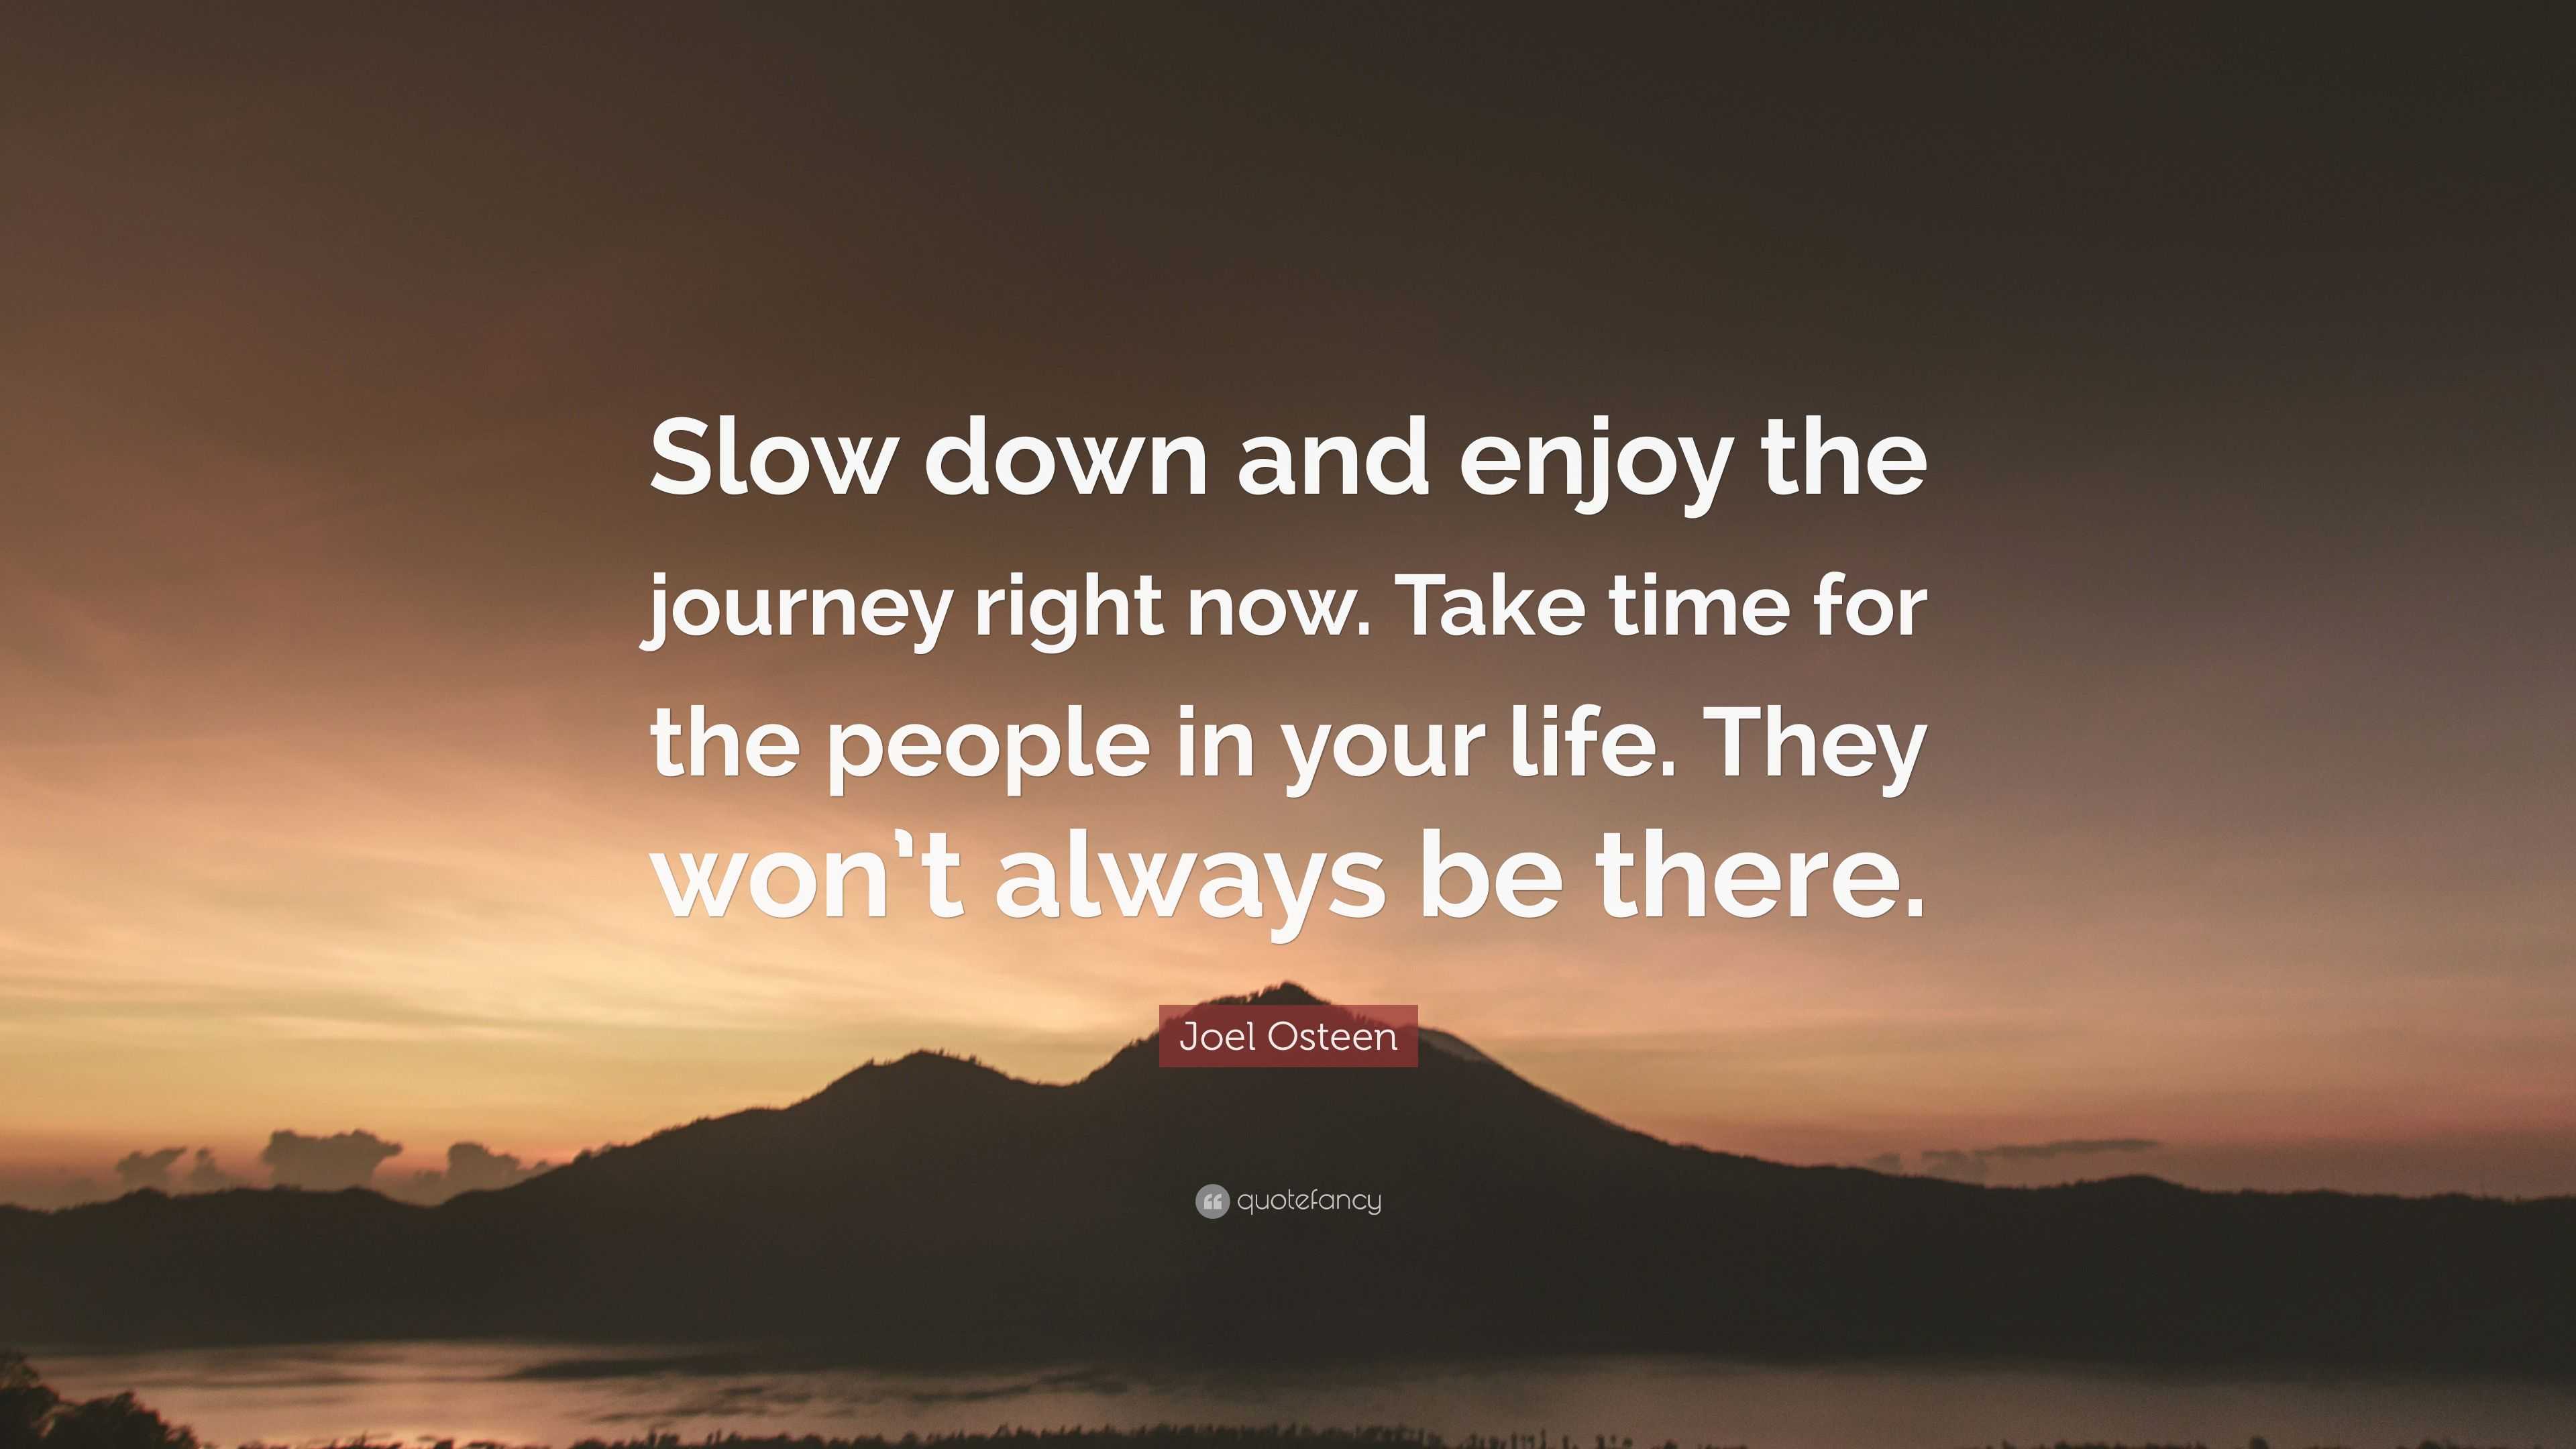 Joel Osteen Quote “Slow down and enjoy the journey right now Take time